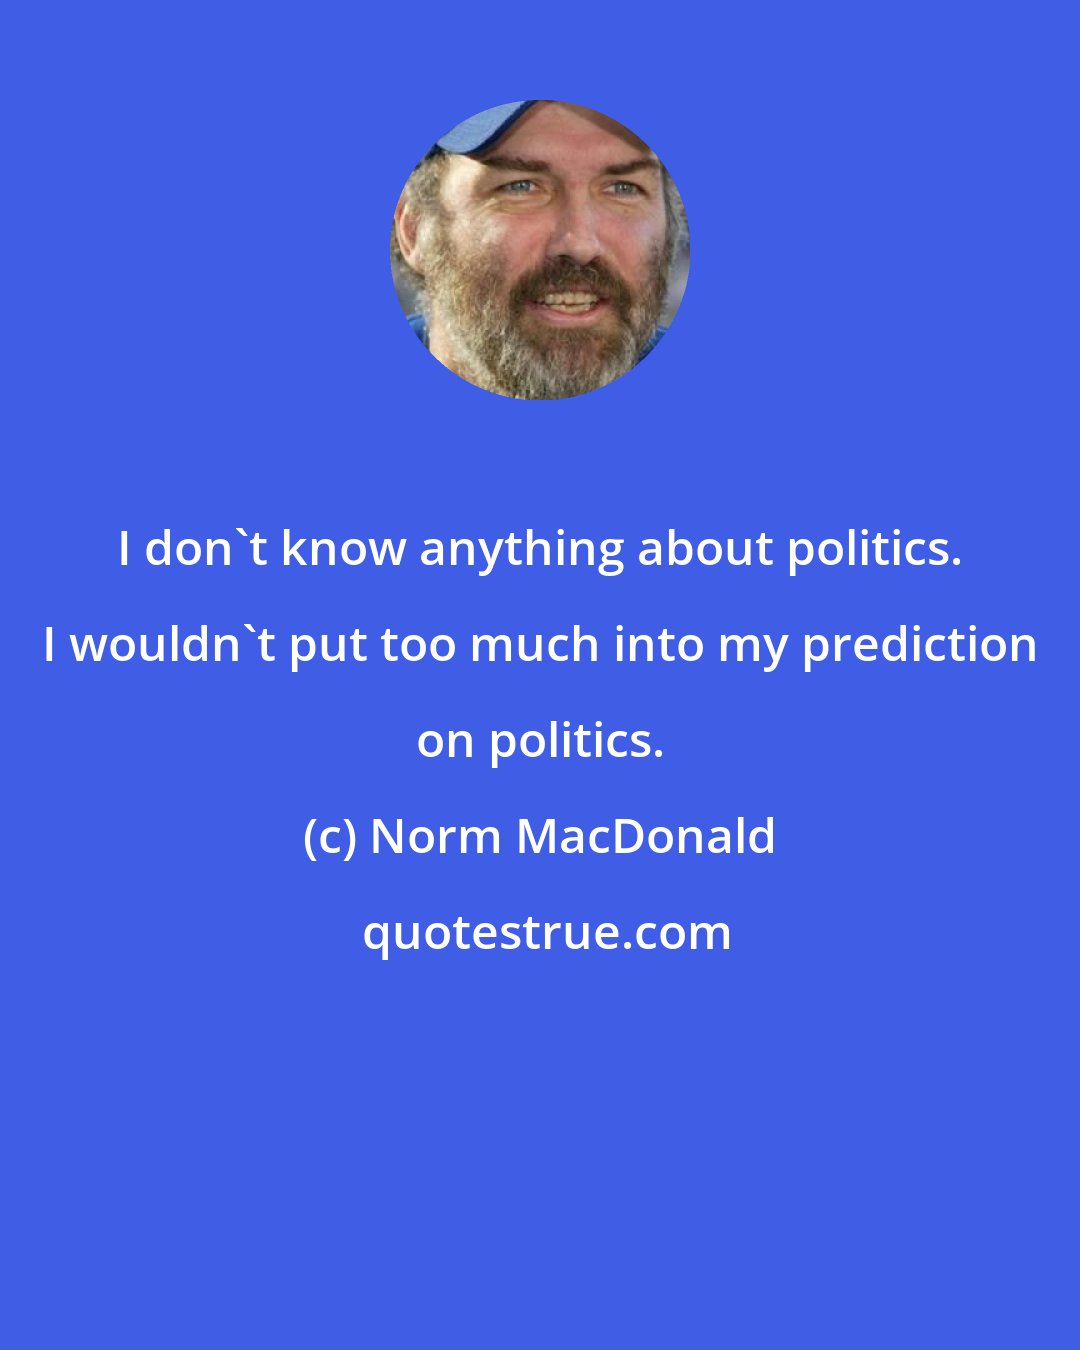 Norm MacDonald: I don't know anything about politics. I wouldn't put too much into my prediction on politics.